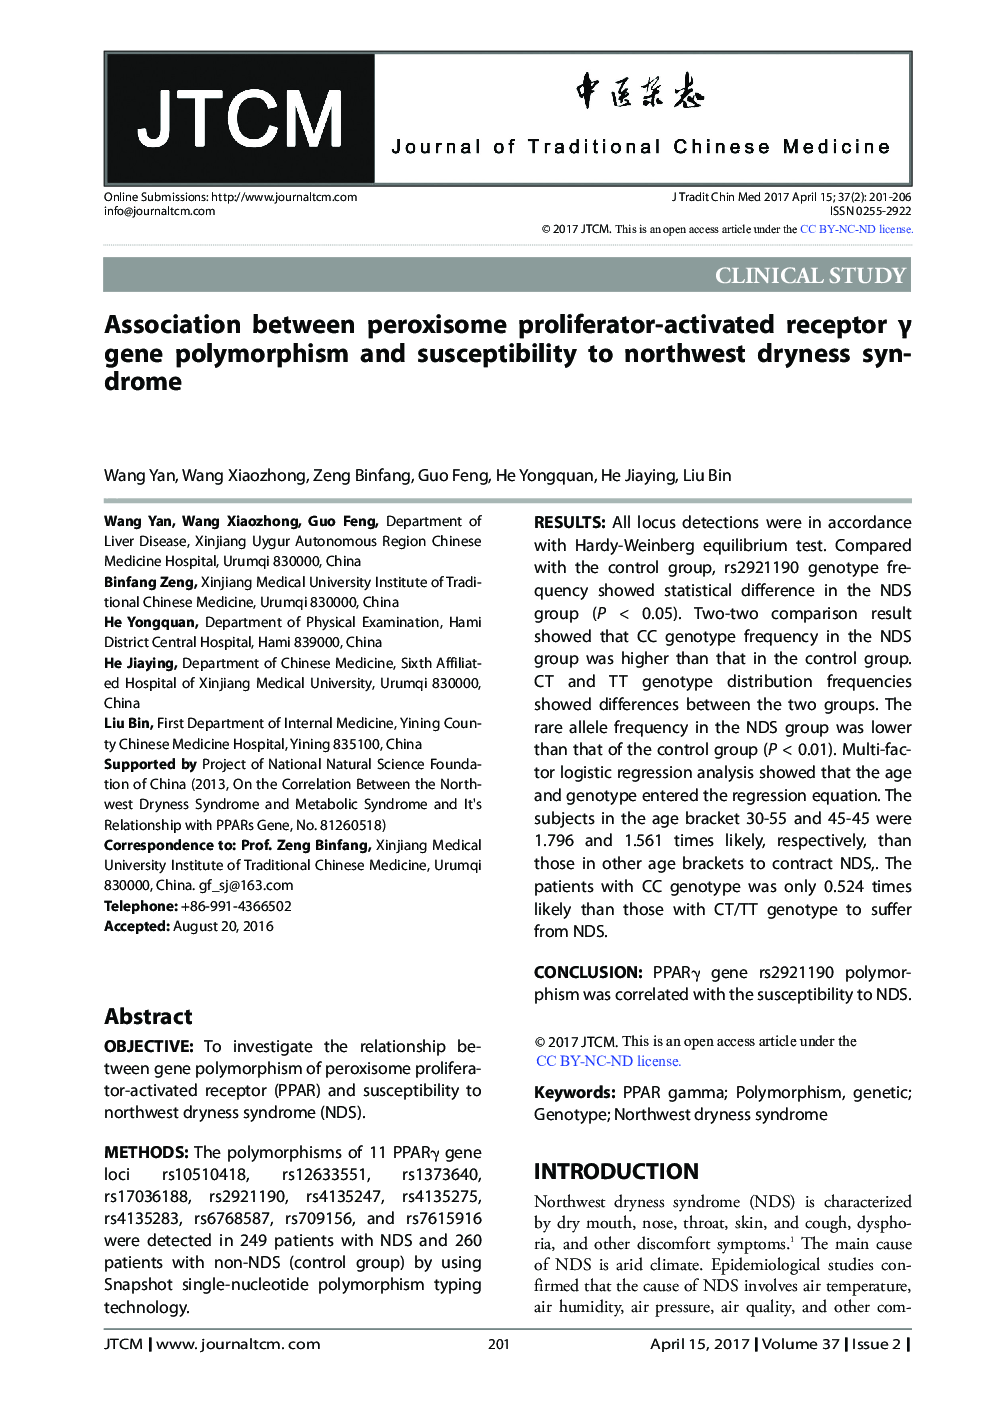 Association between peroxisome proliferator-activated receptor Î³ gene polymorphism and susceptibility to northwest dryness syndrome